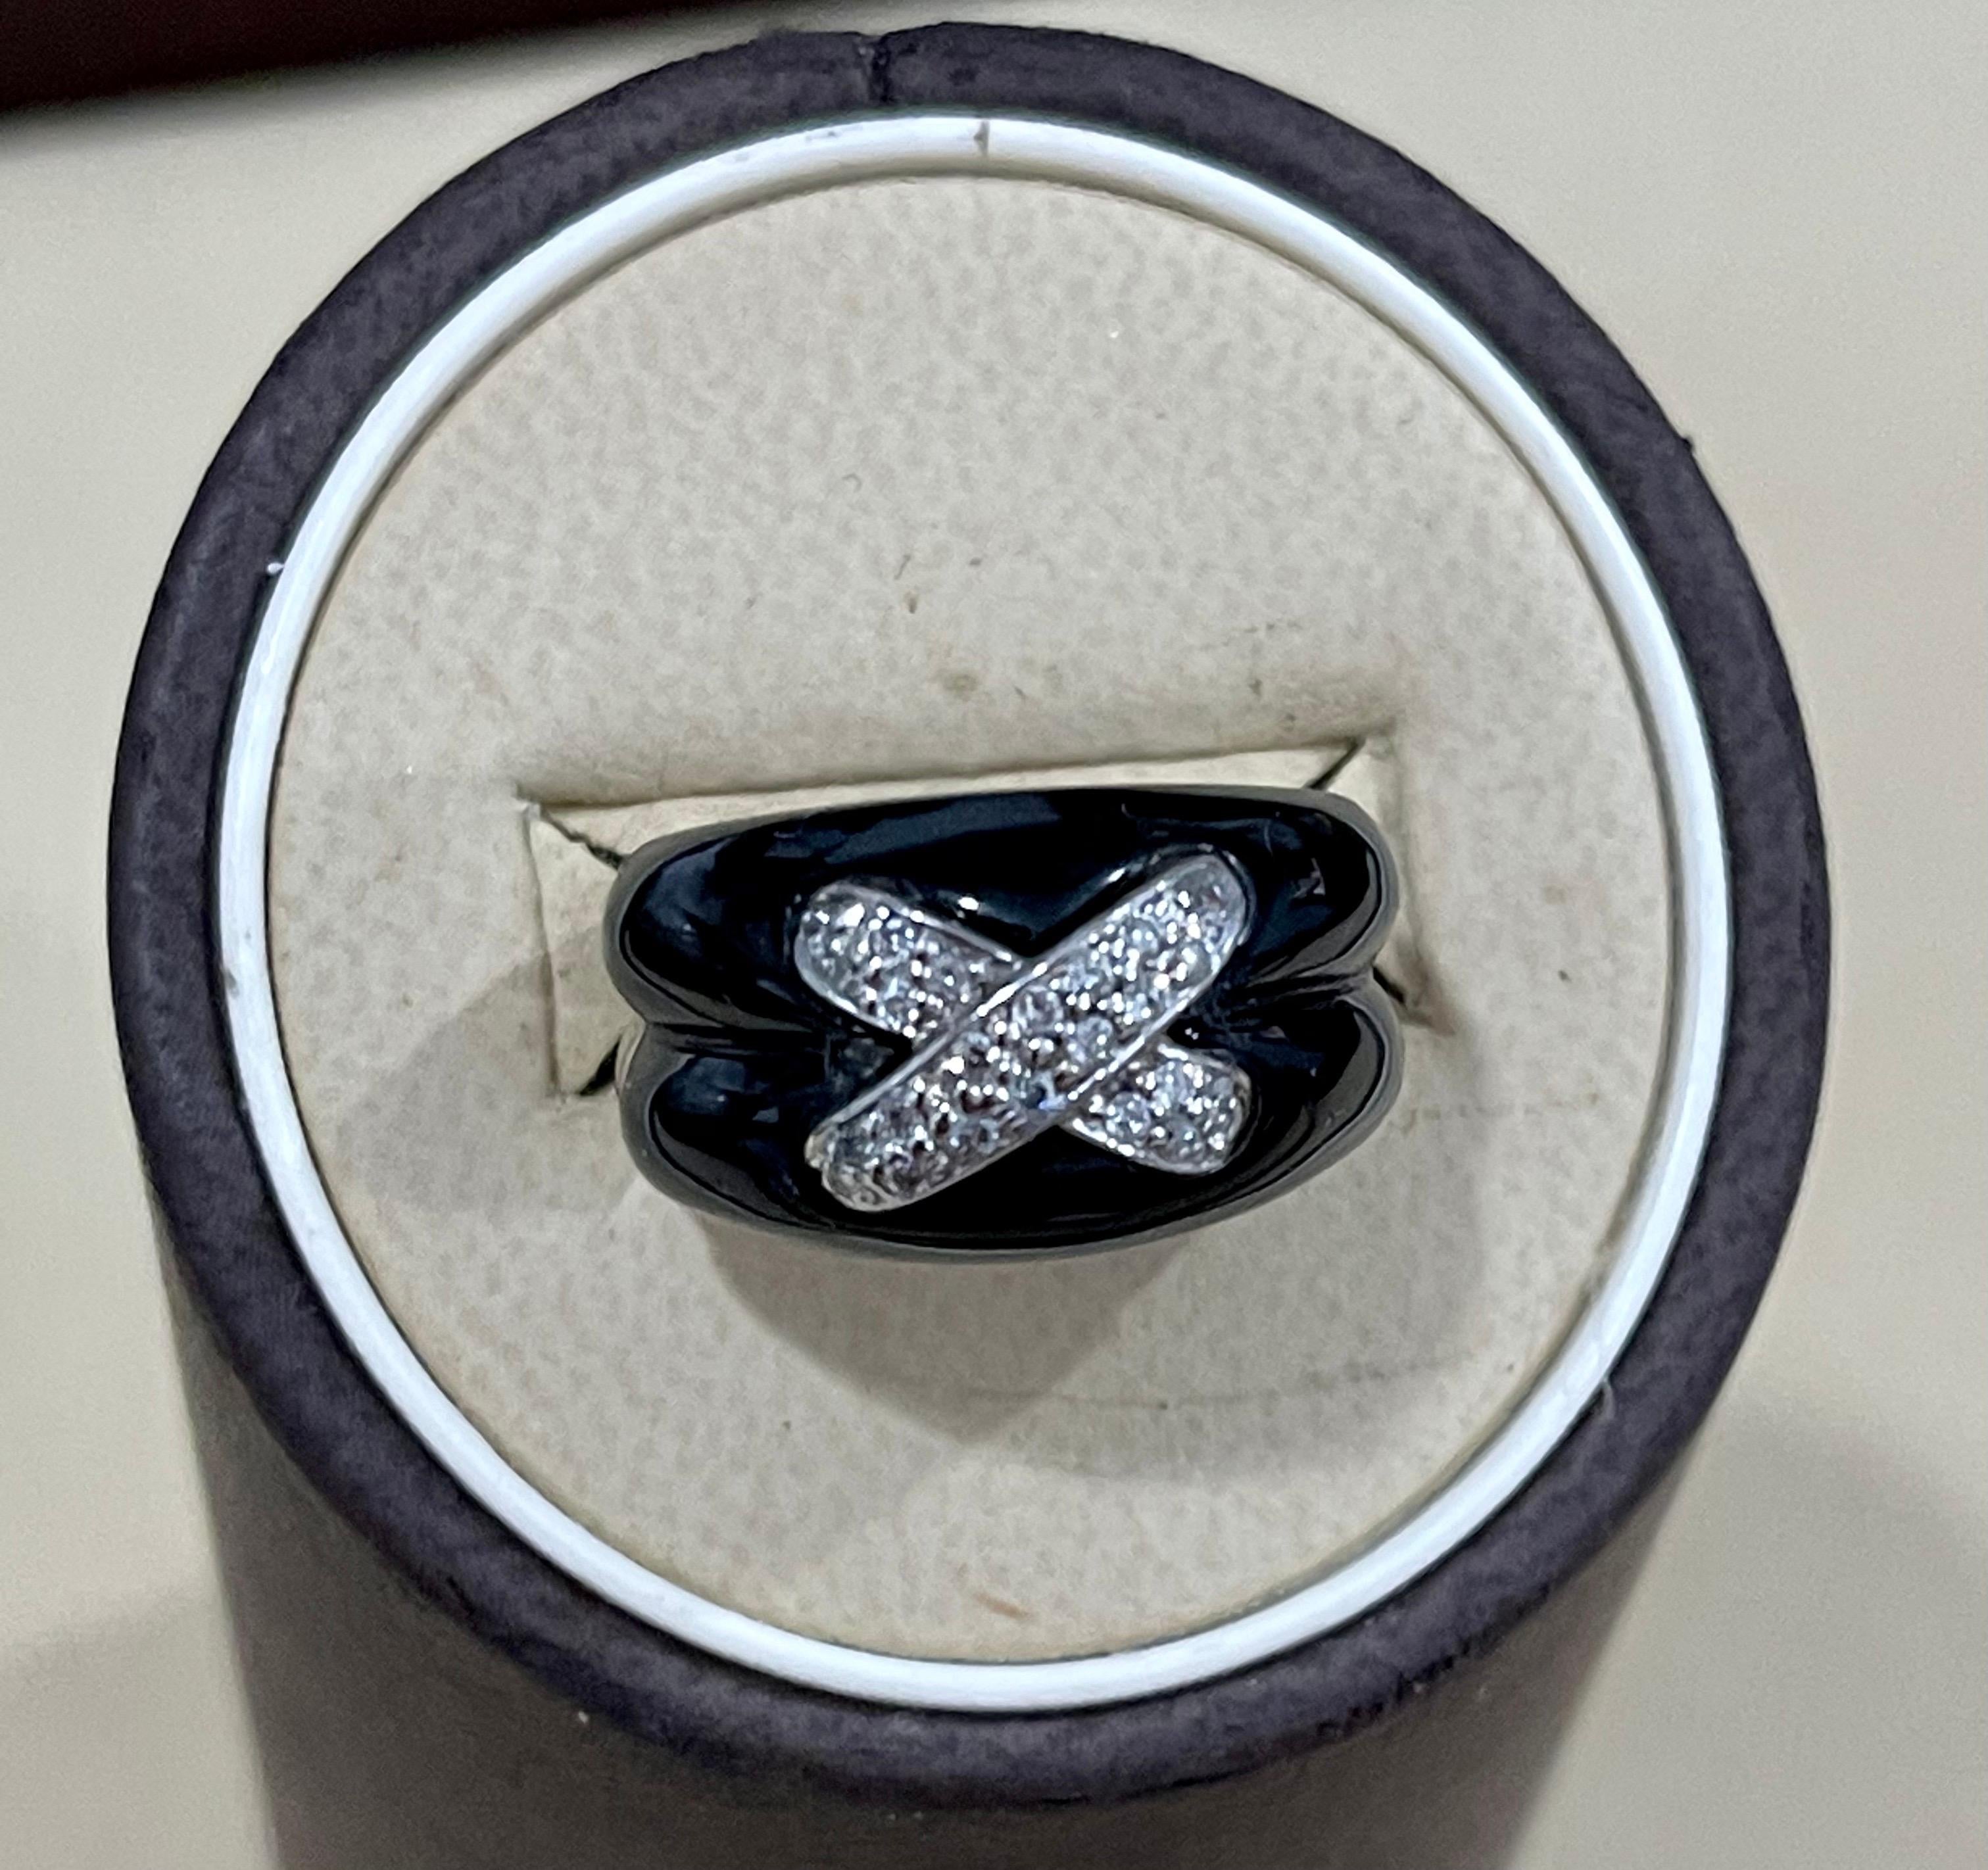 Approximately 0.2 Carat White Diamond and Black Onyx  Ring 18 Karat White Gold size 5 &1/2
18 K gold 9.3 Grams,
Stamped  for 18 K gold 
This is a Engagement band  from our premium wedding collection.
Ring size is 5 & 1/2 and can be altered to any